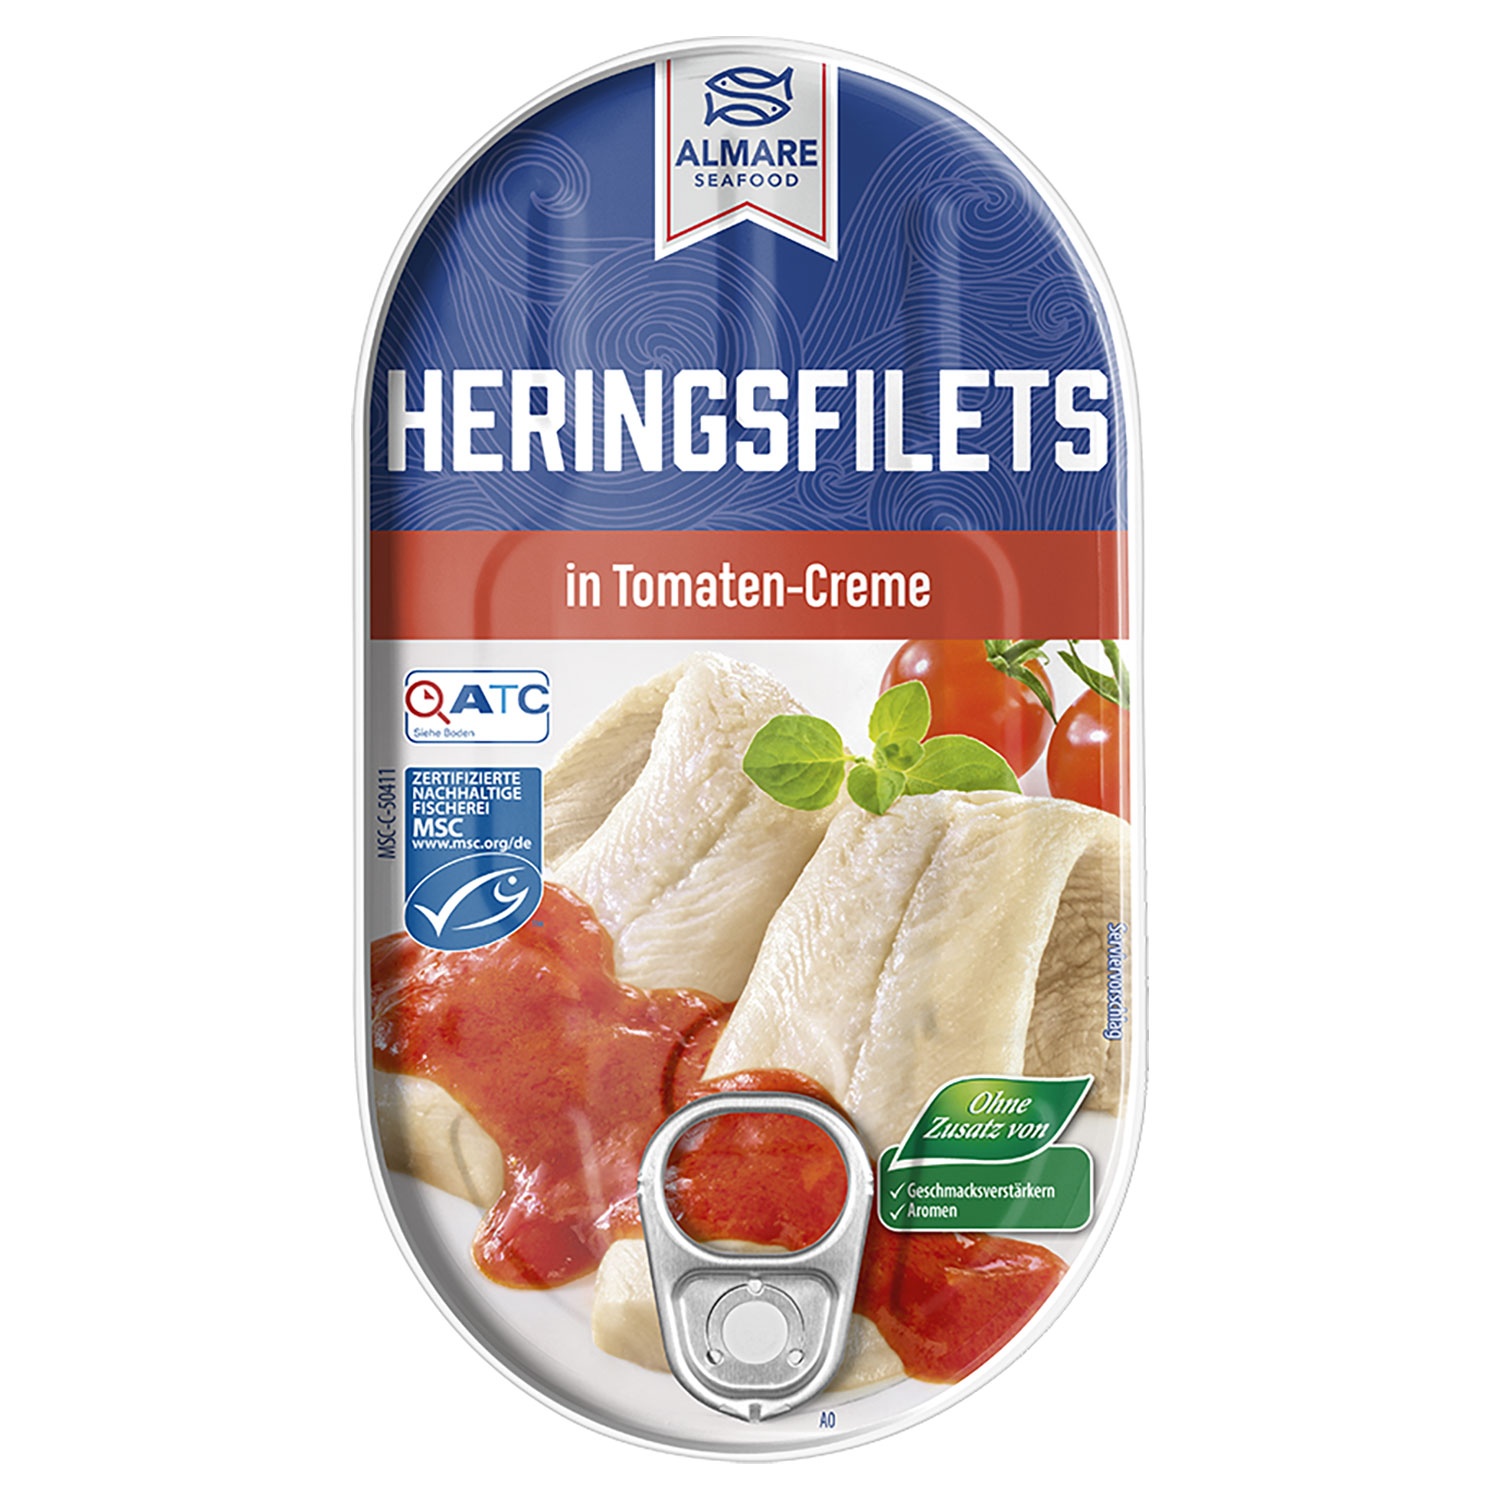 ALMARE SEAFOOD Heringsfilets in Creme 200 g